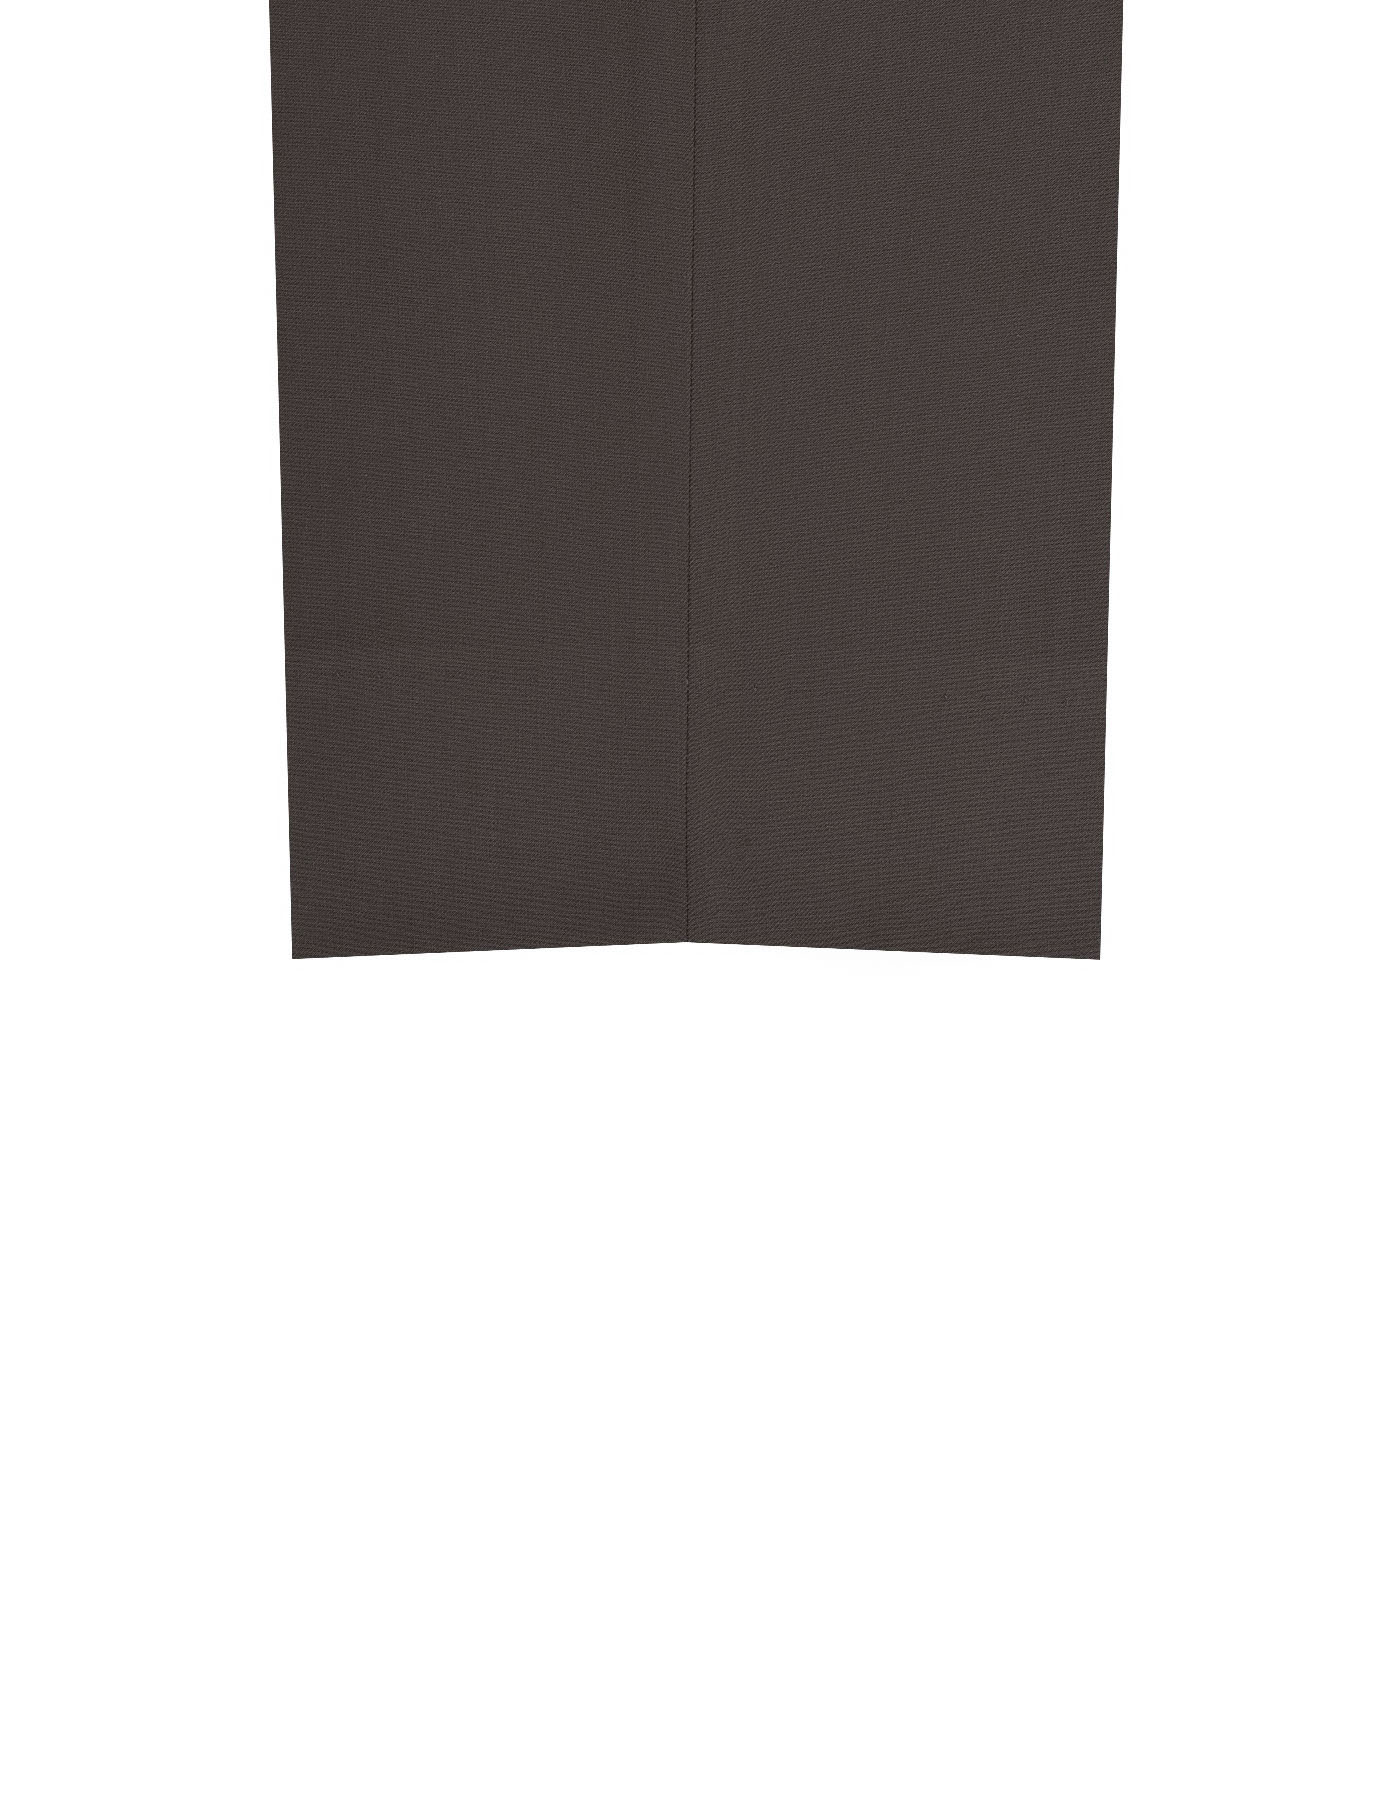 Buy Mens Chocolate Formal Trouser Online Shopping in Pakistan | Uniworth